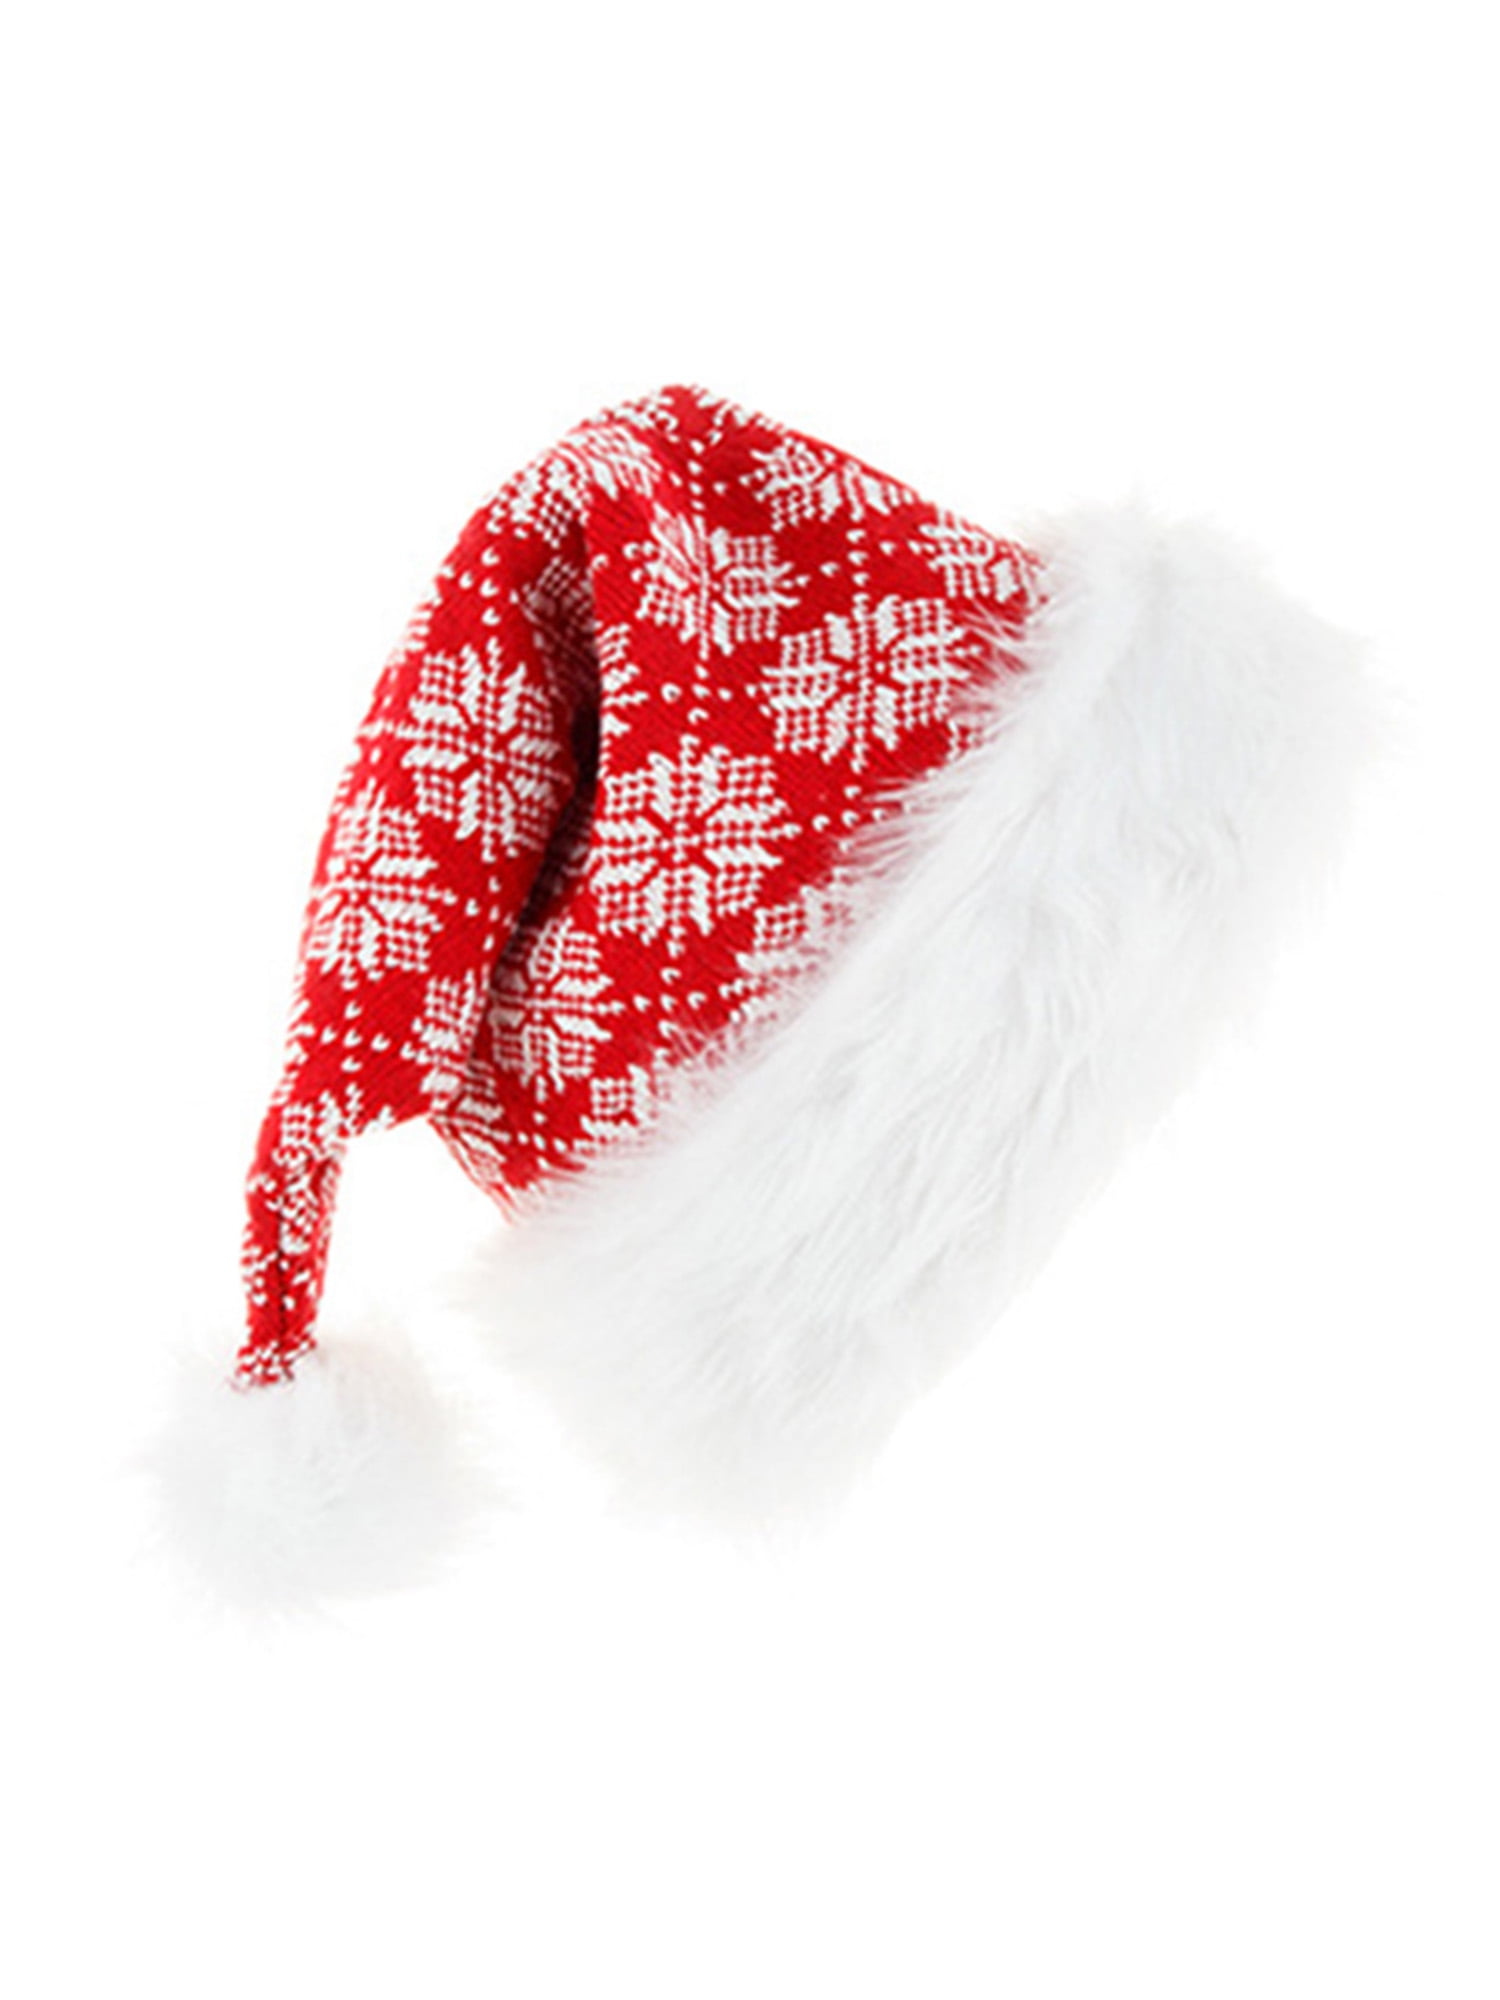 NEW MENS WOMENS KNITTED LINED FESTIVE XMAS FATHER CHRISTMAS SANTA HAT WITH LEGS